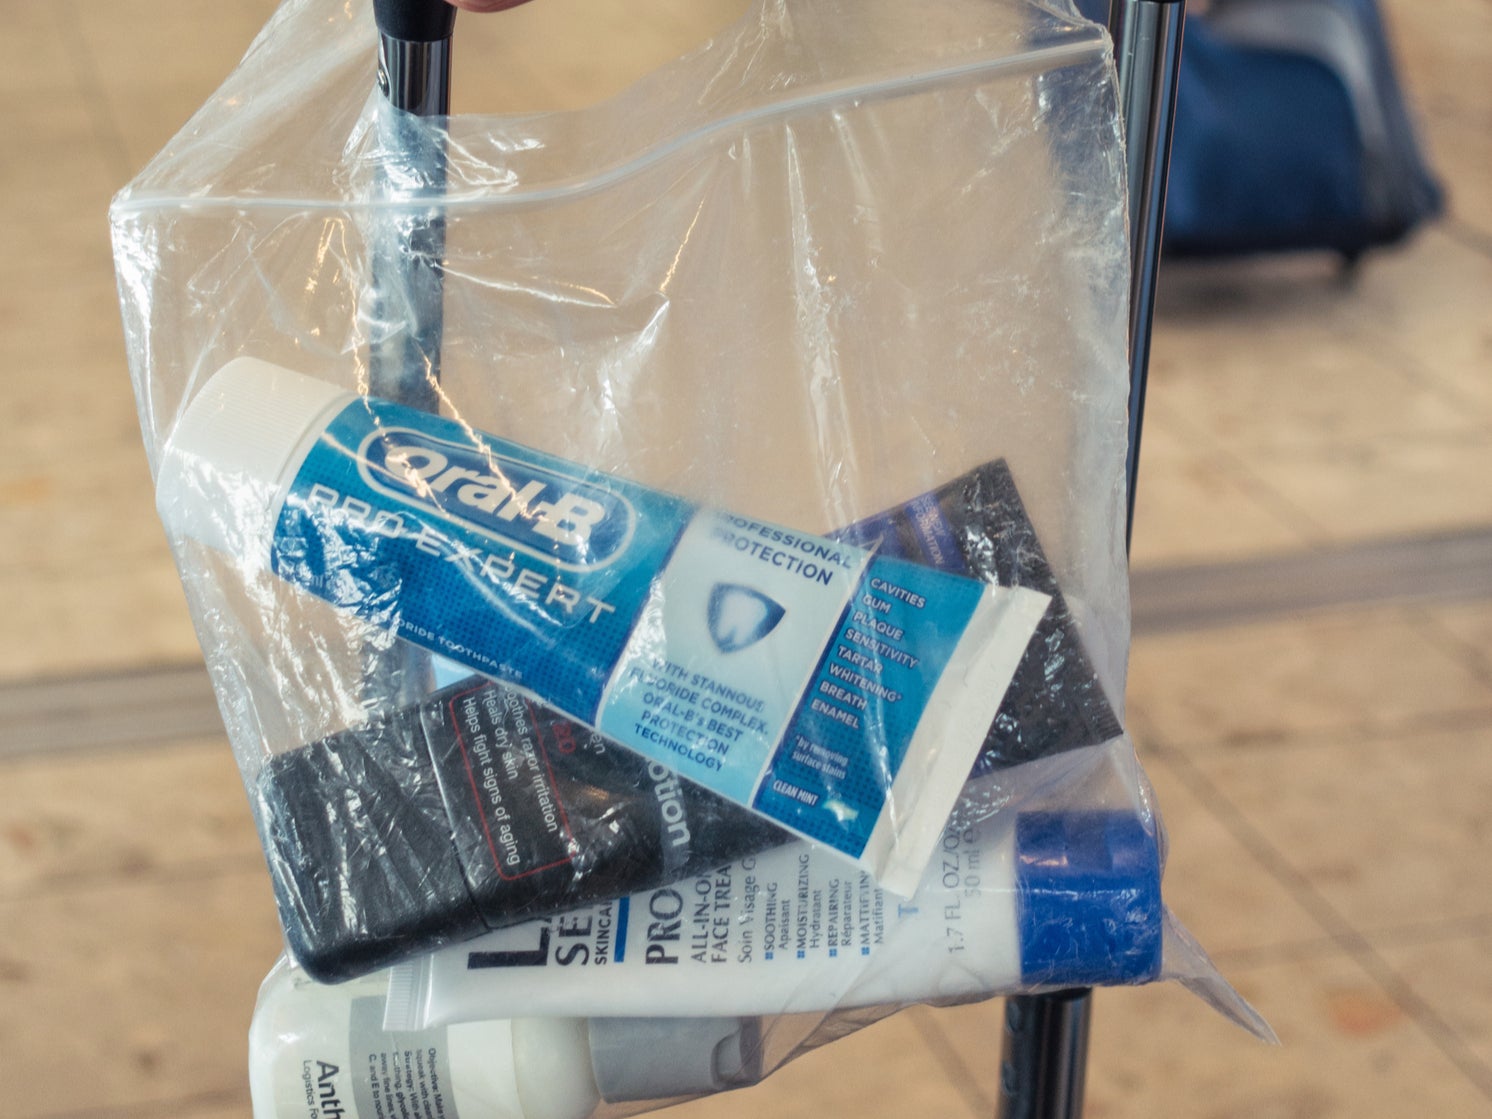 A transparent bag containing small bottles of liquid and gel in compliance with airport security